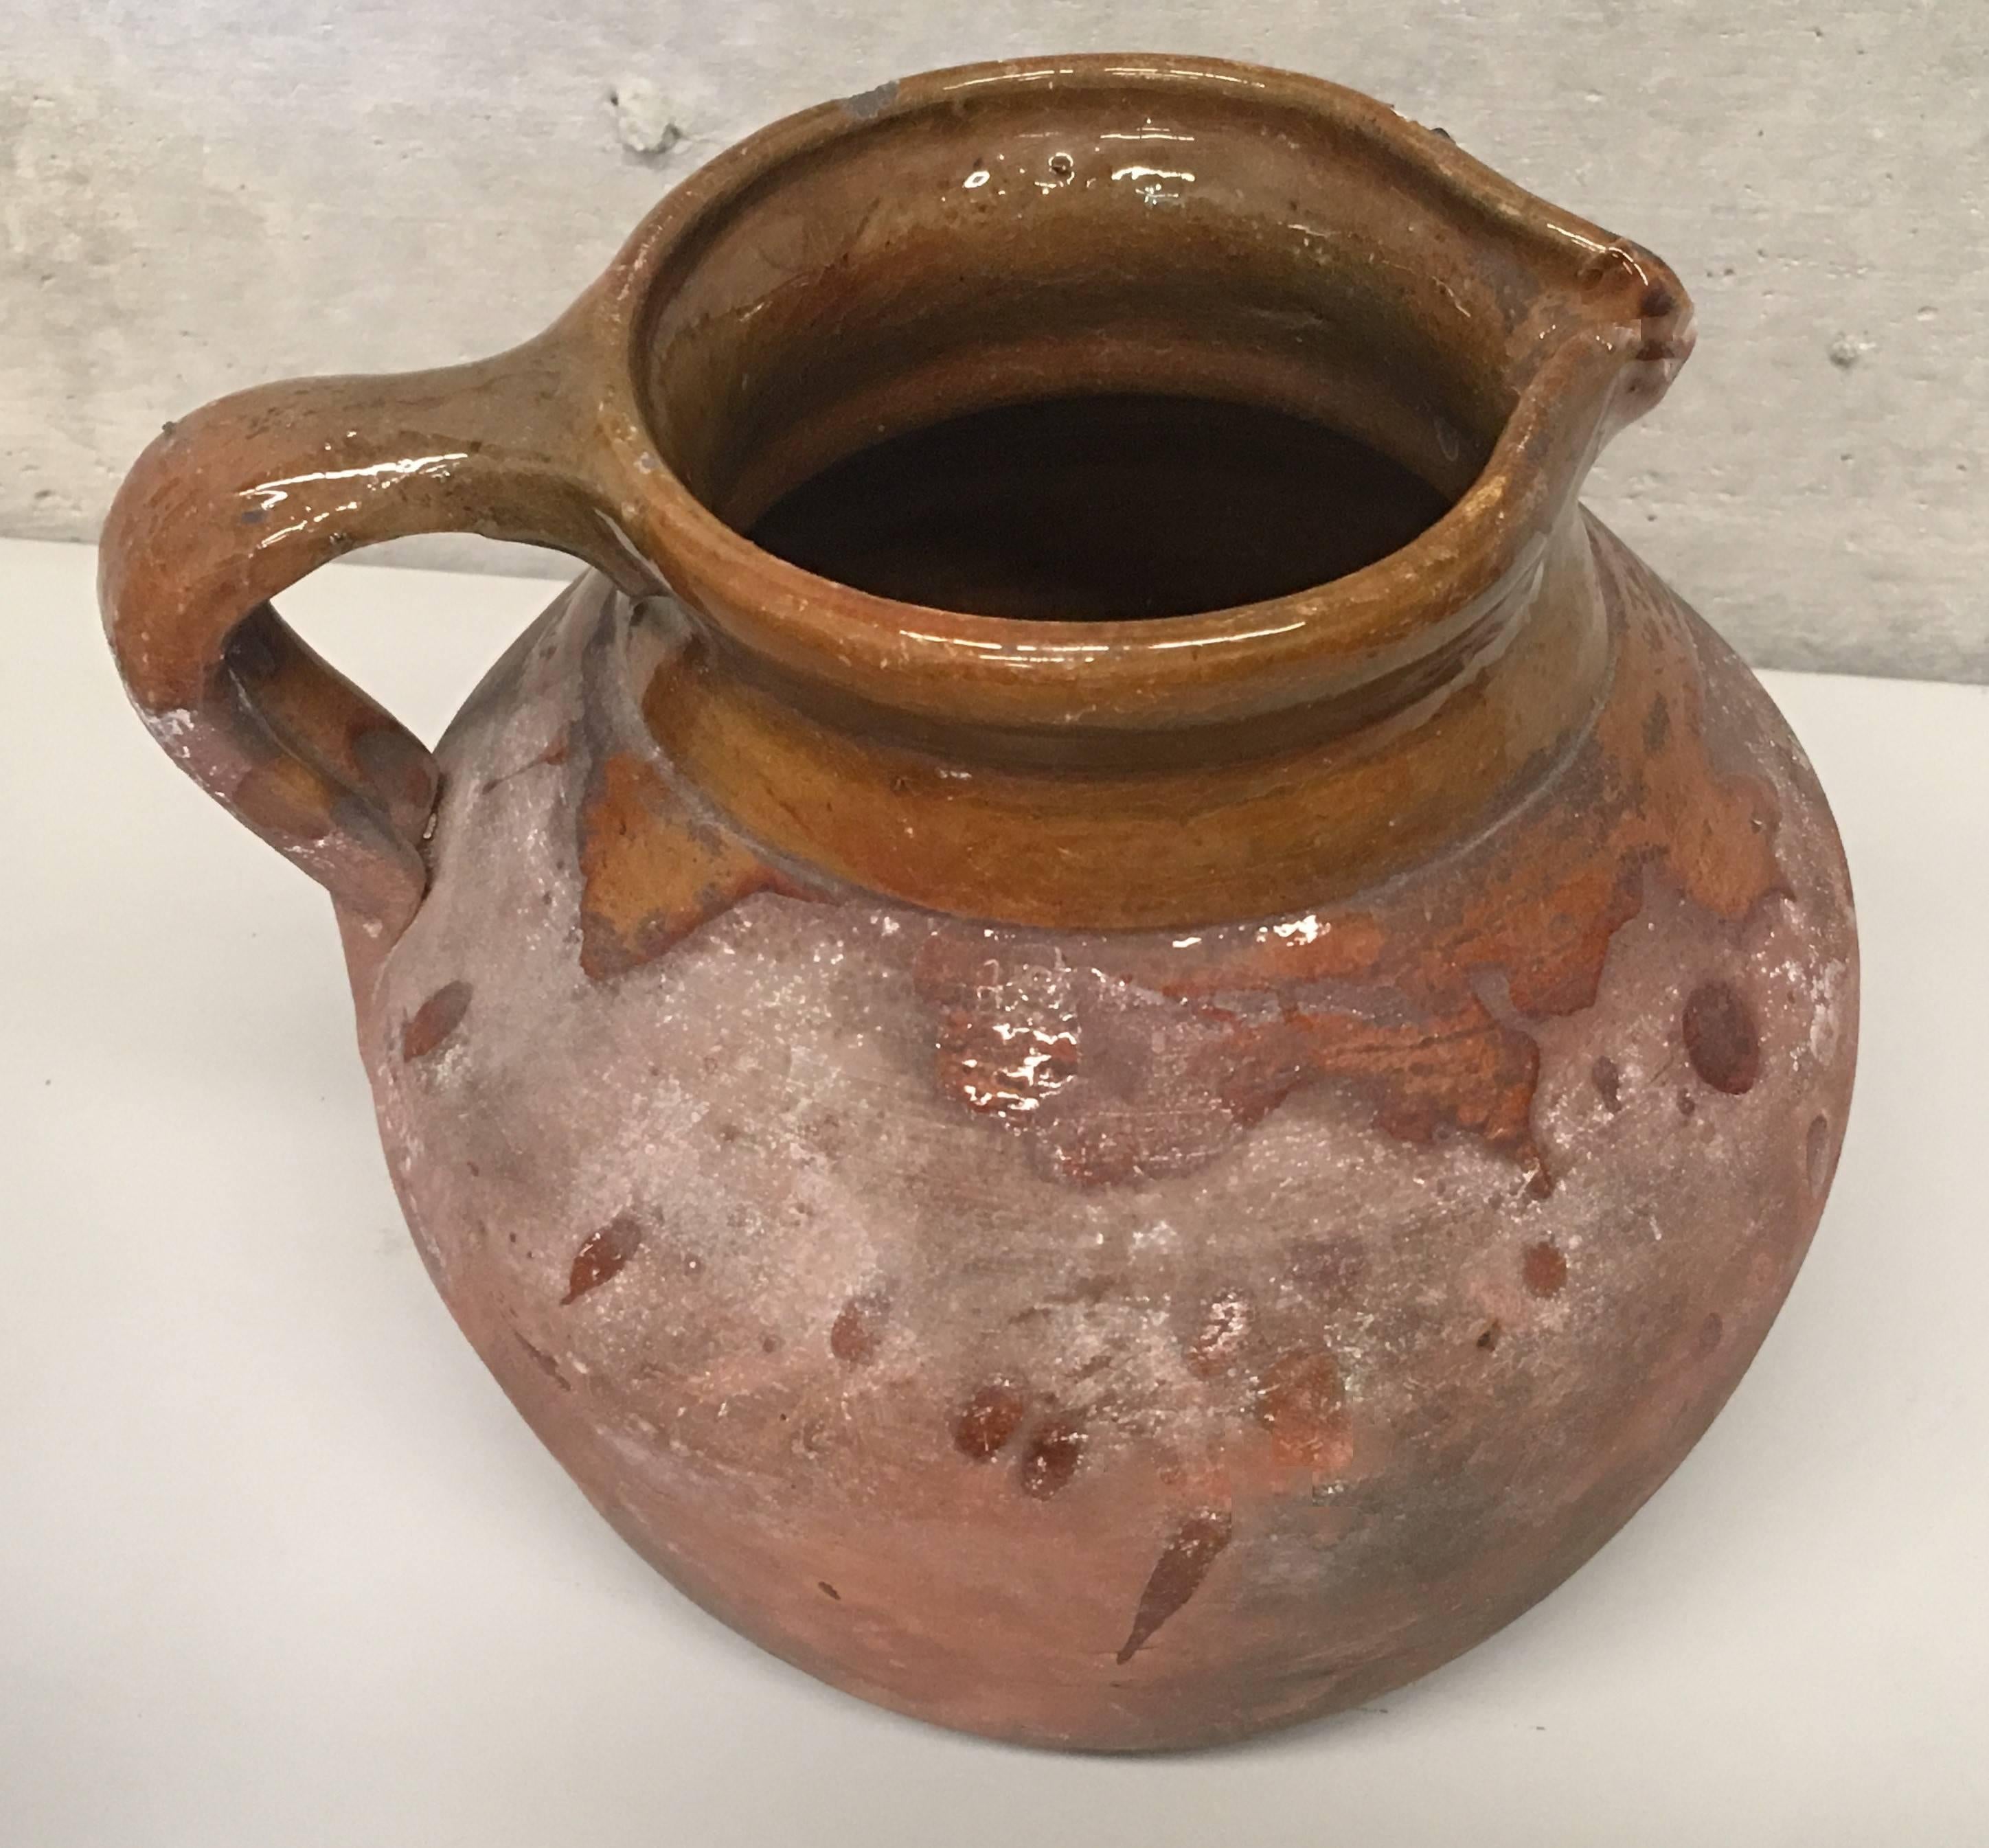 19th century Spanish stoneware terracotta jug or pot with handle.